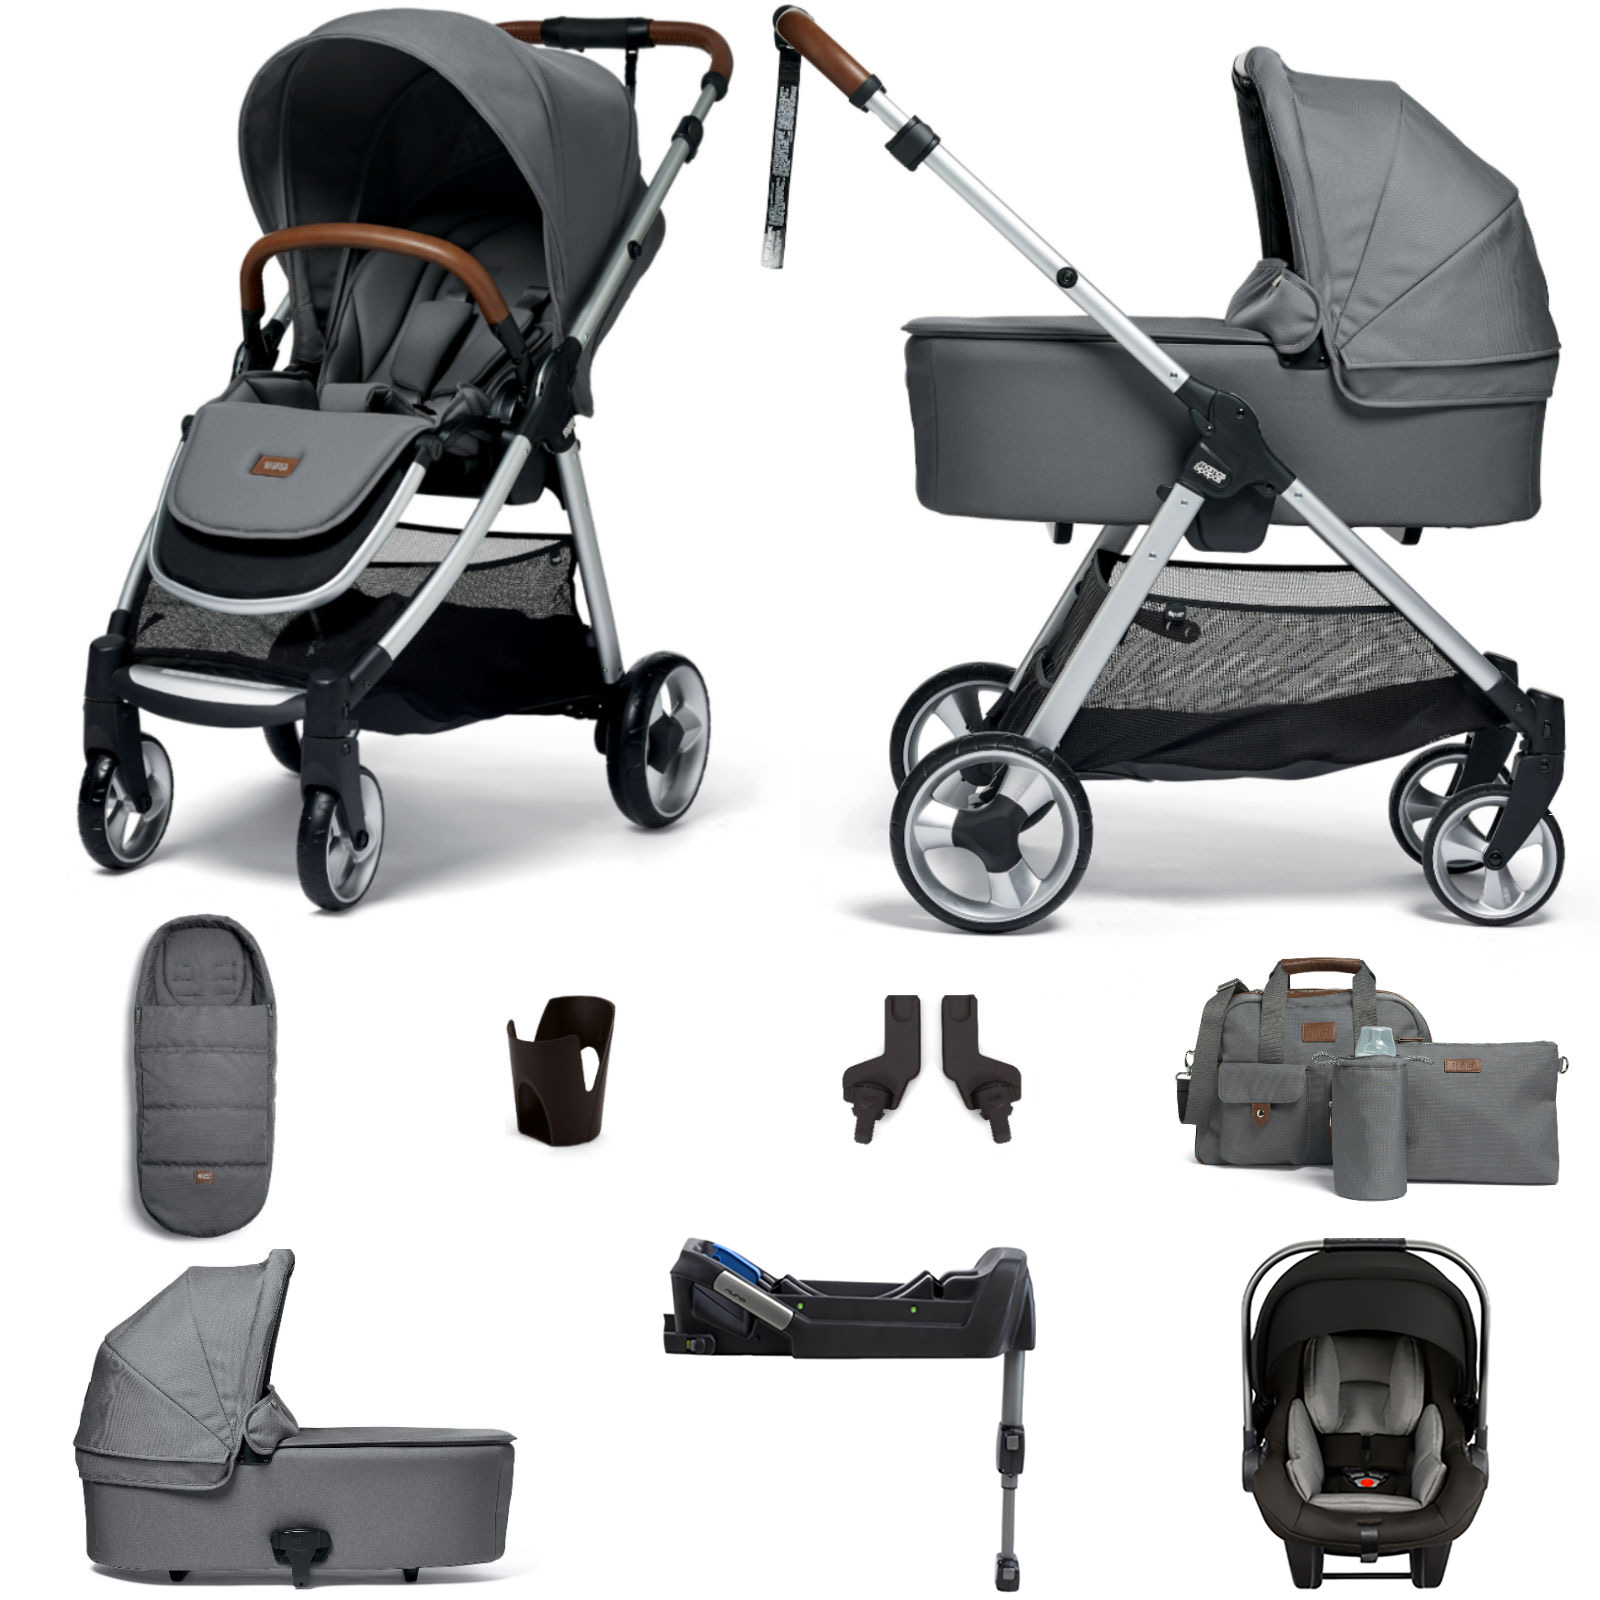 Mamas & Papas Flip XT2 Essentials (Pipa Lite Car Seat & ISOFIX Base) Travel System with Carrycot - Grey